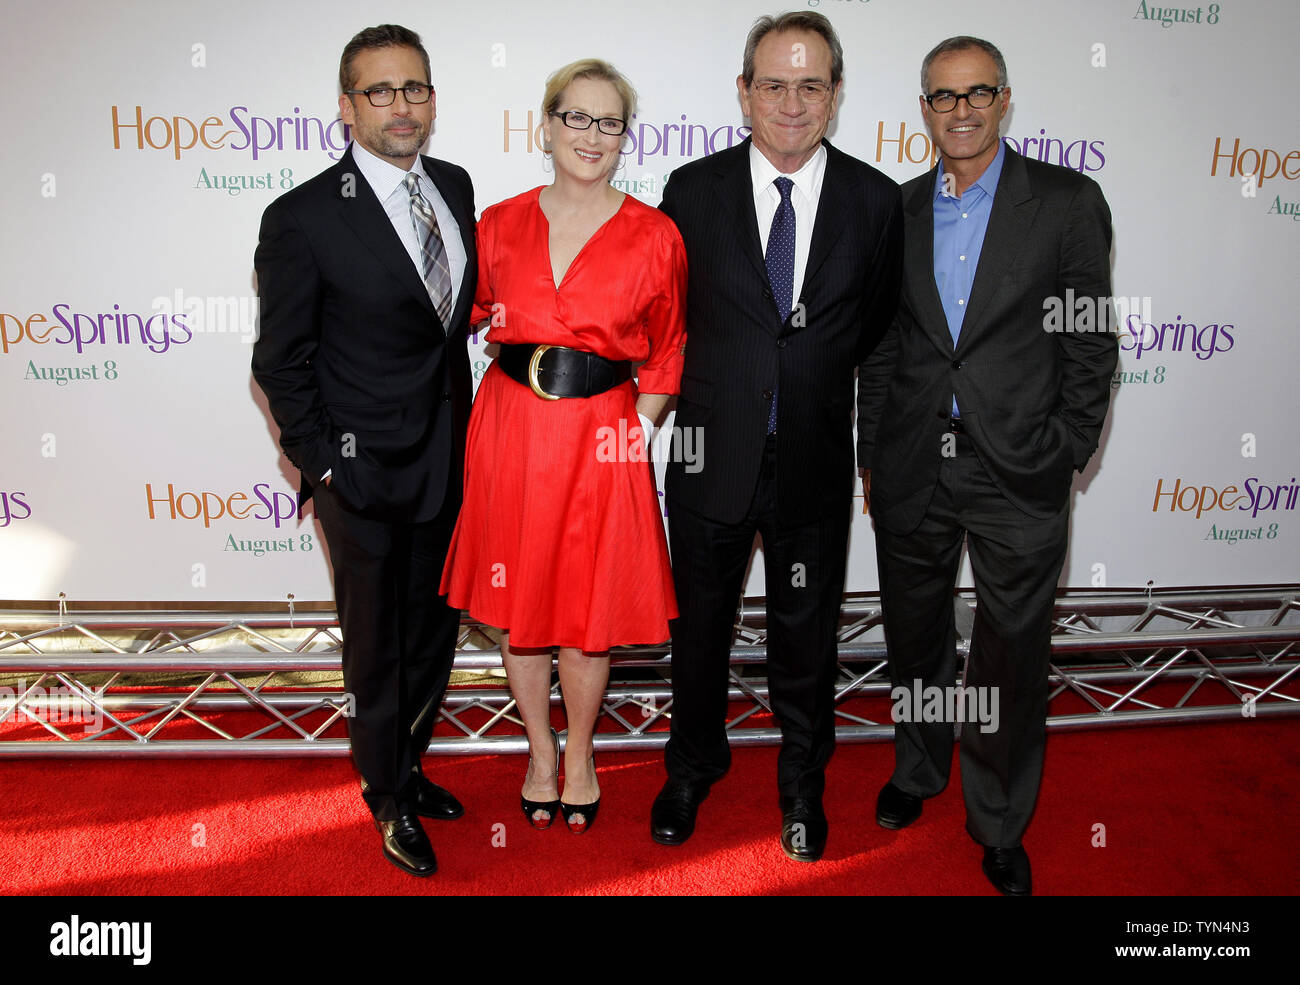 Steve Carell, Meryl Streep, Tommy Lee Jones and David Frankel arrive on the red carpet at the world premiere of Columbia Pictures 'Hope Springs' at the SVA Theater in New York City on August 6, 2012.       UPI/John Angelillo Stock Photo